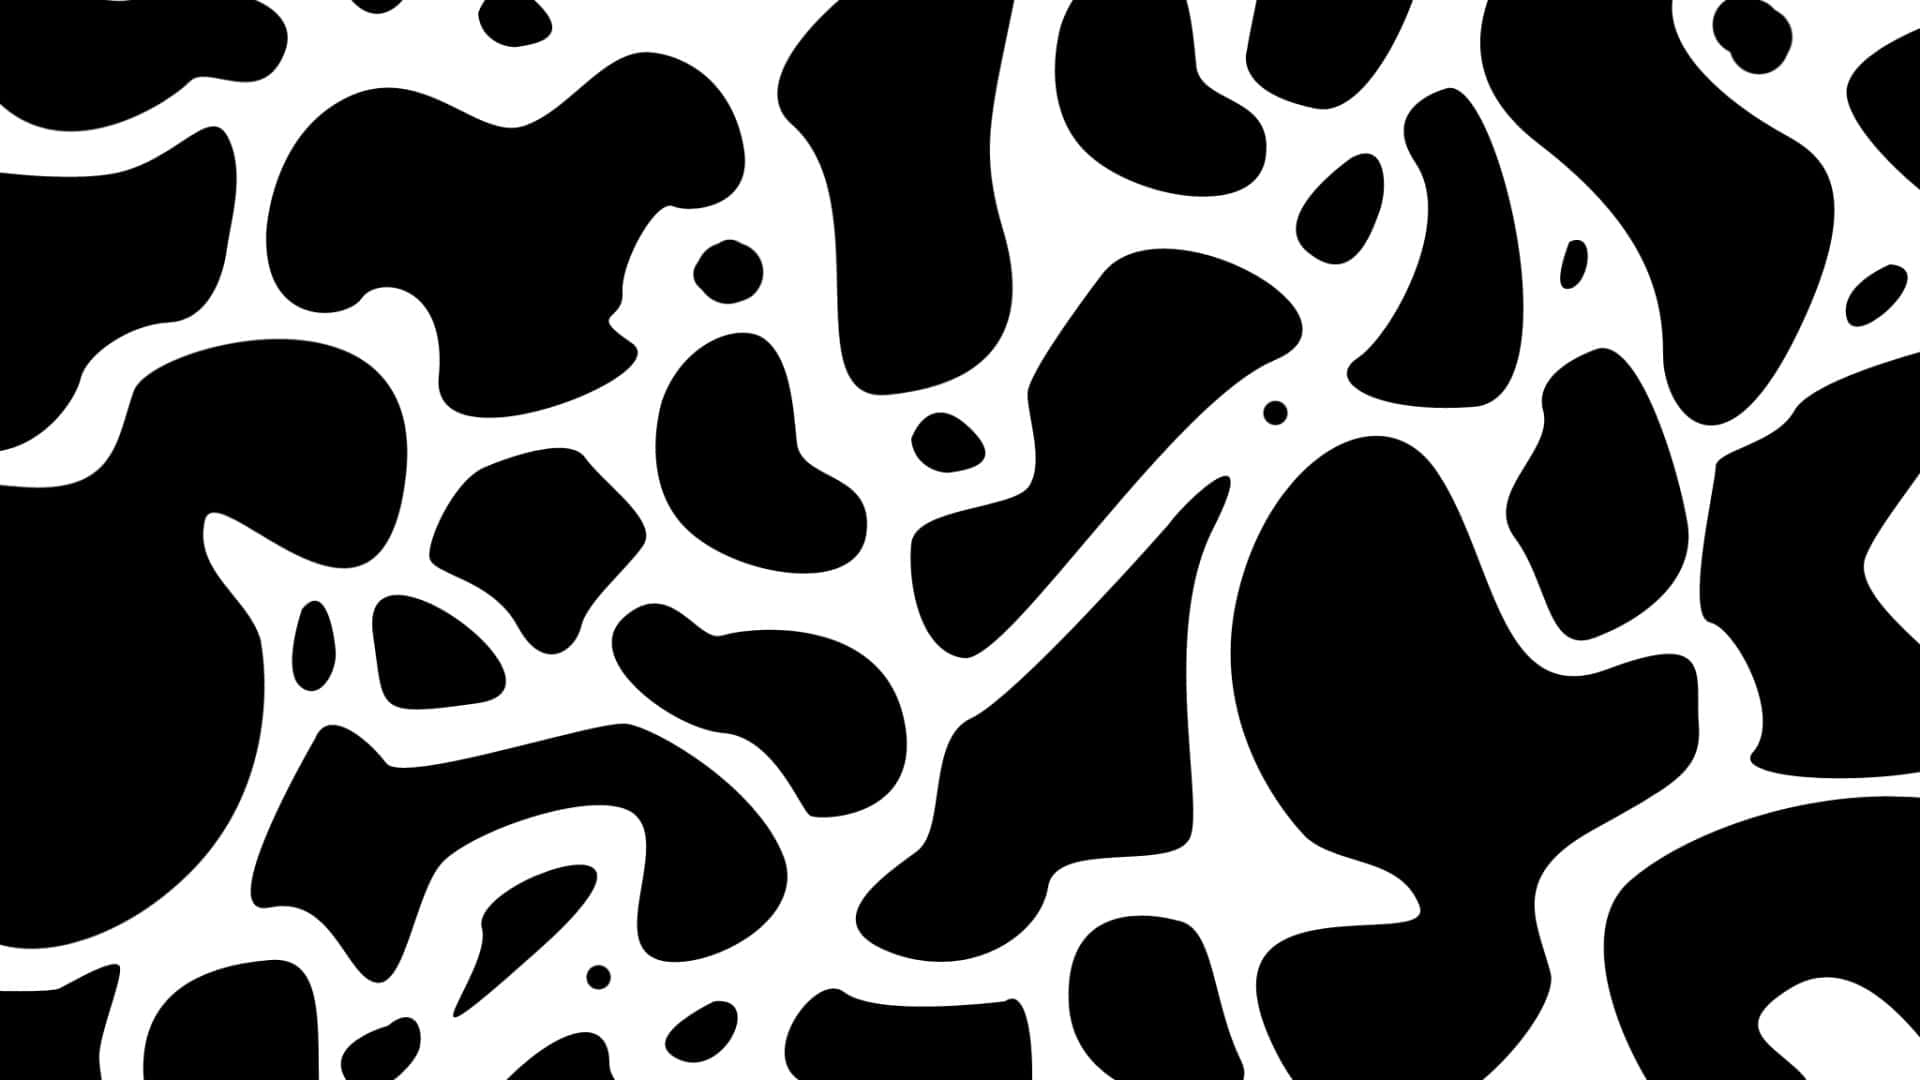 100+] Cow Pattern Wallpapers